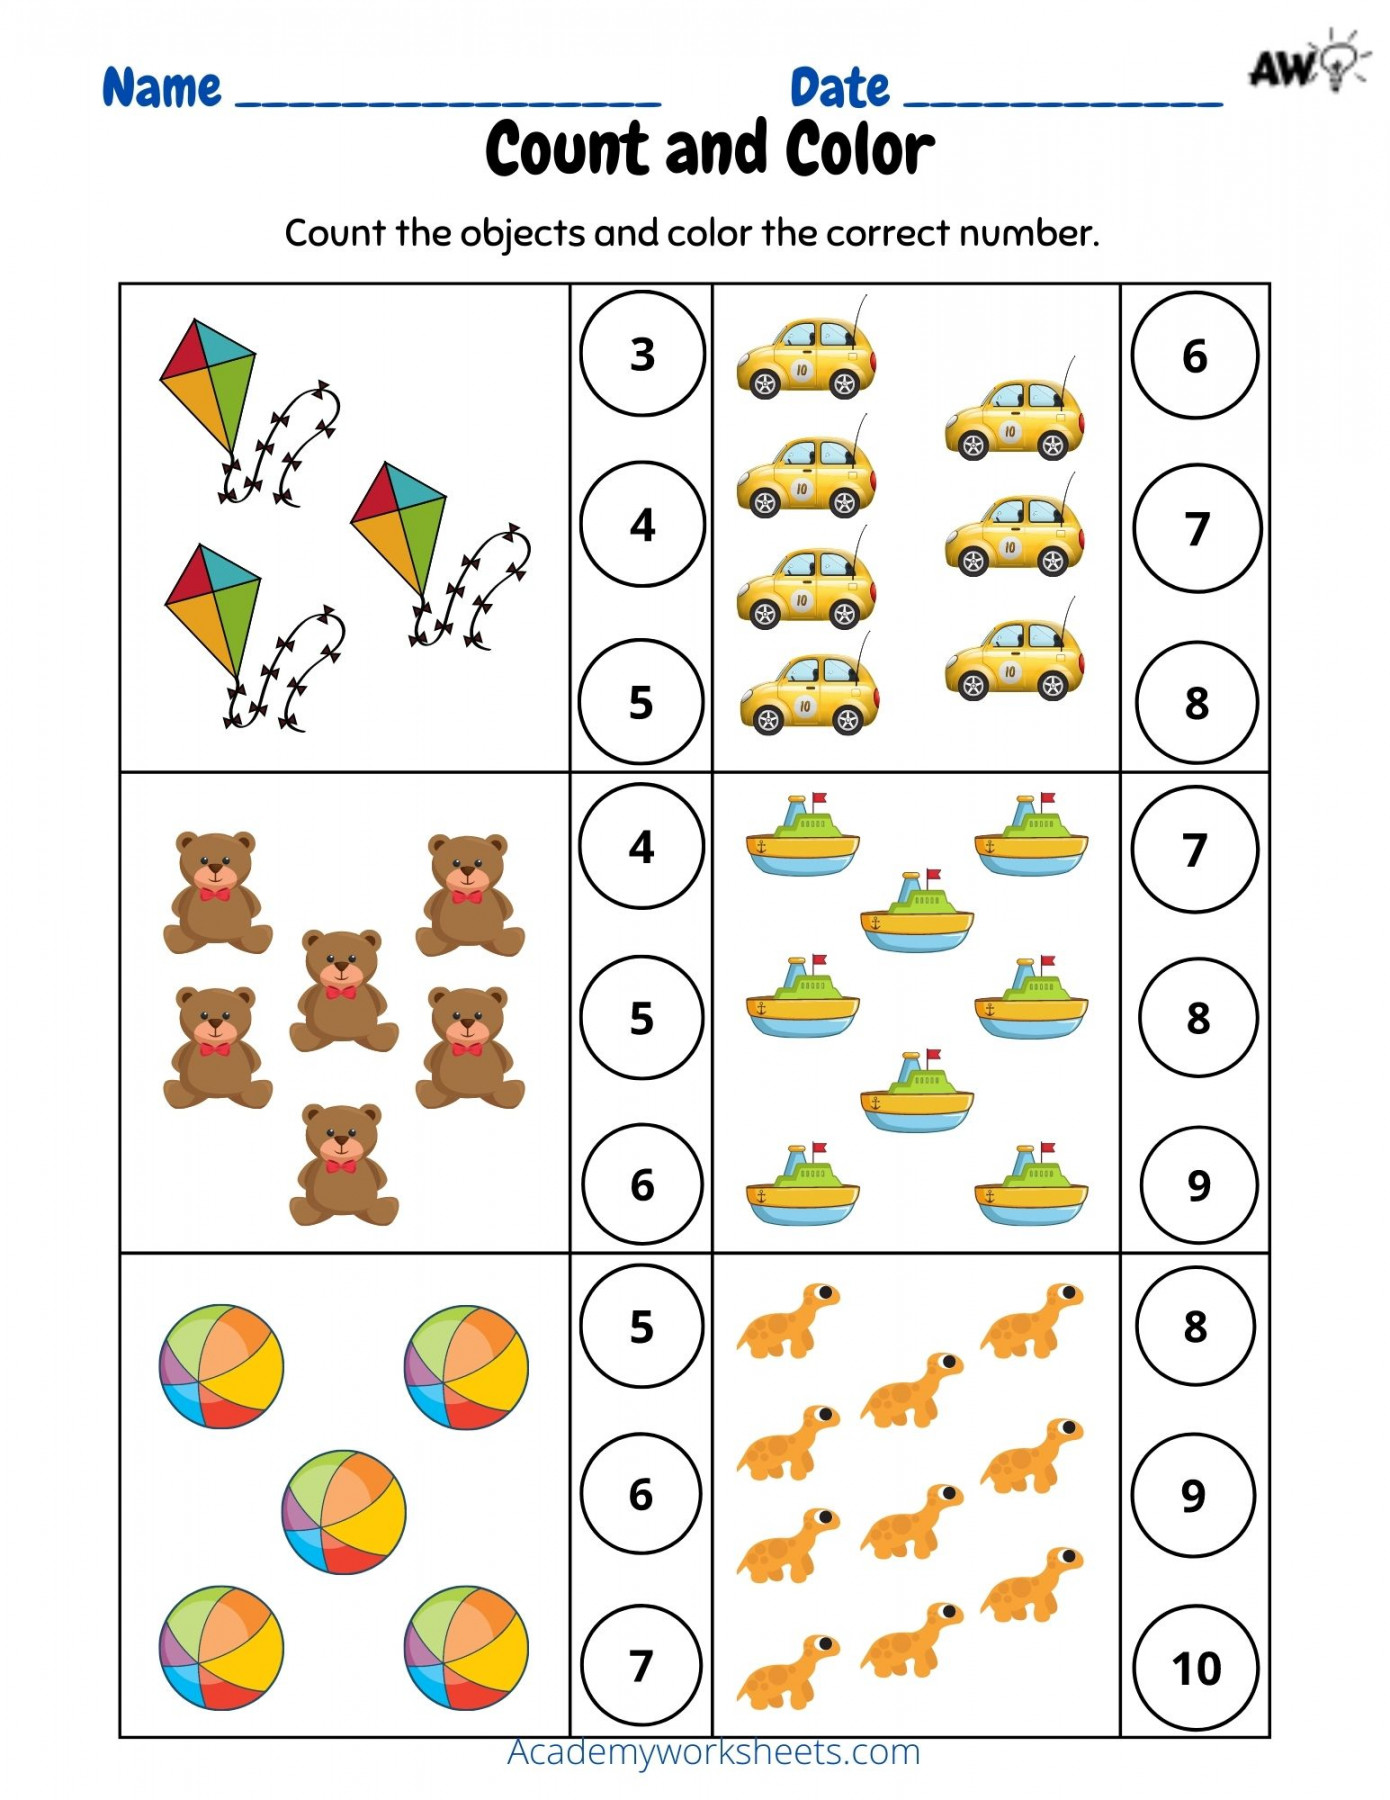 Count and Match Numbers -0 Worksheets - Academy Worksheets